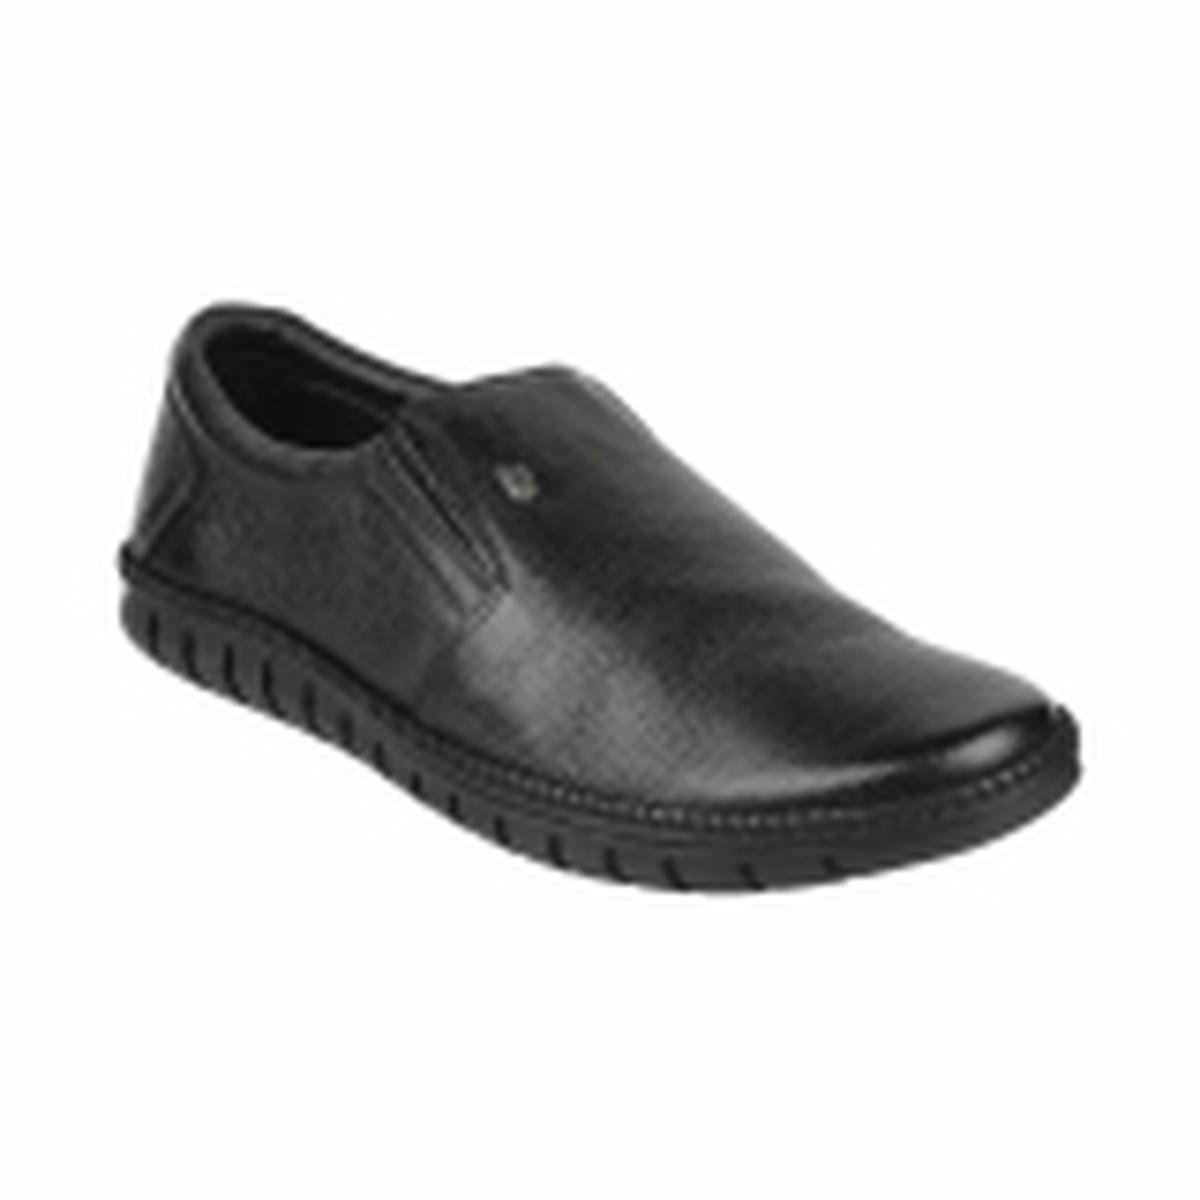 Buy ID Men's Genuine Leather Formal Shoes (ID2039_Black_11 UK) at Amazon.in